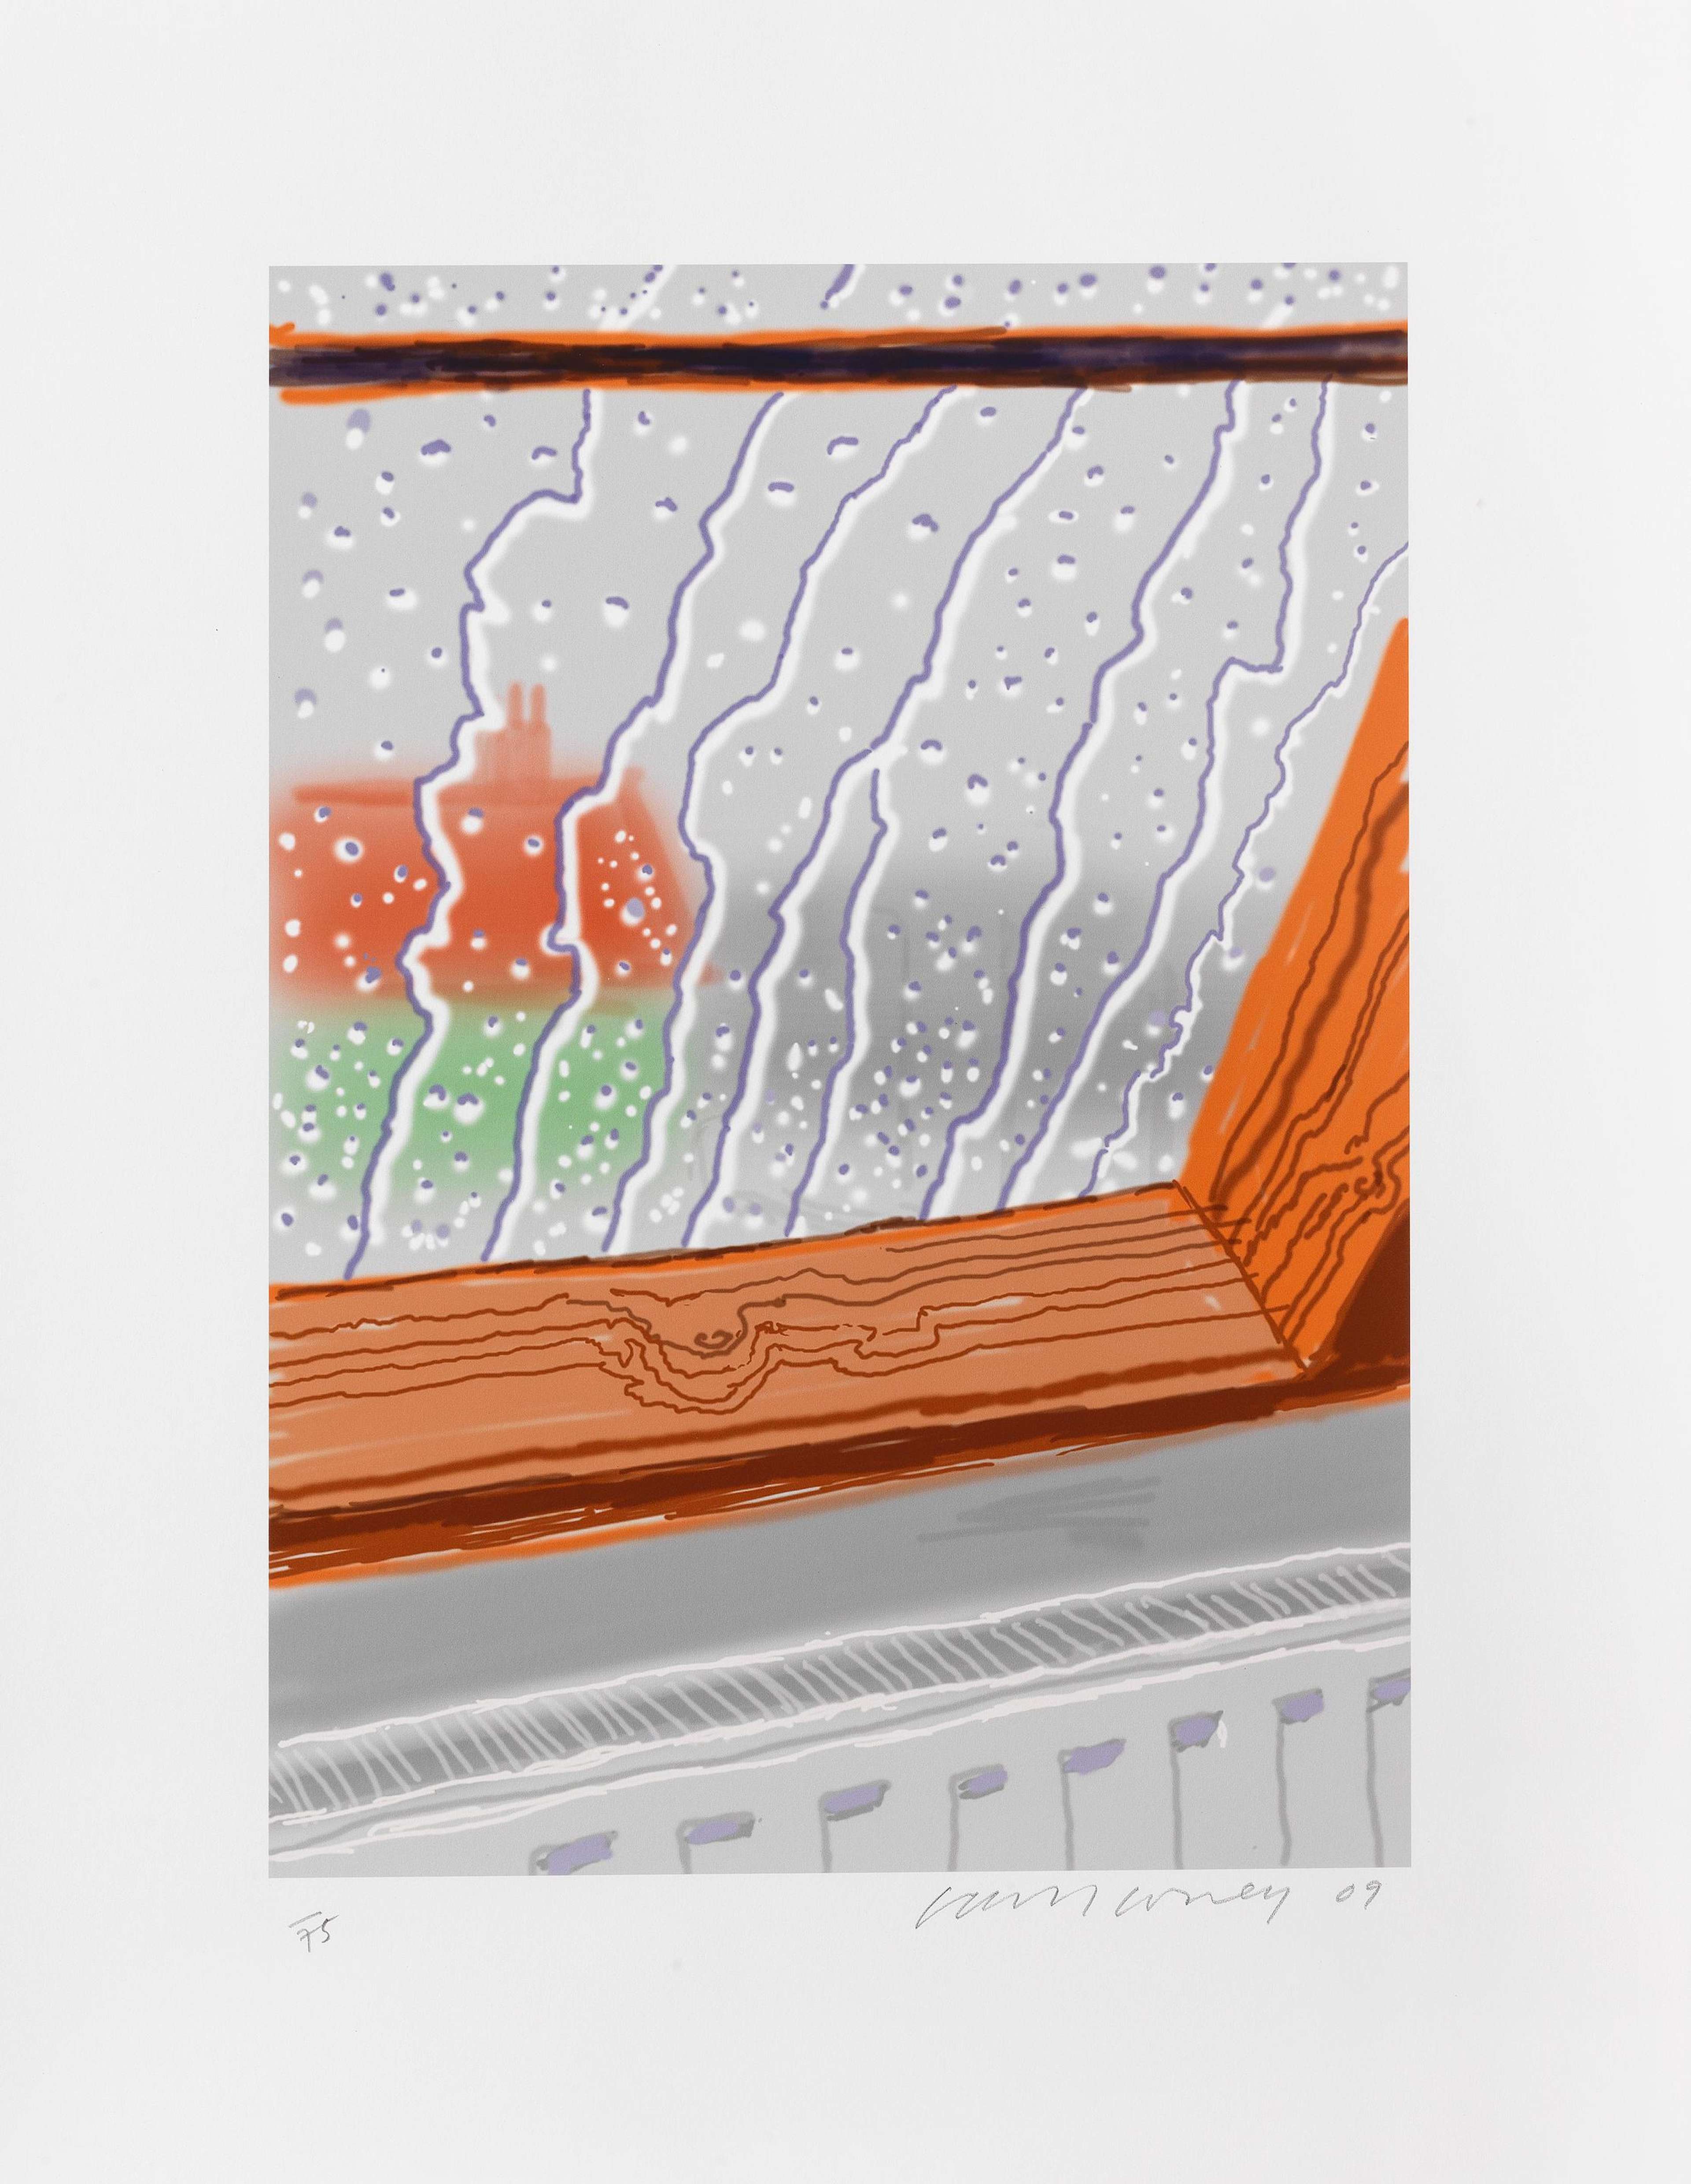 David Hockney’s Rain On The Studio Window. A digital print of the interior view of a window that is foggy with raindrops covering its outside. 